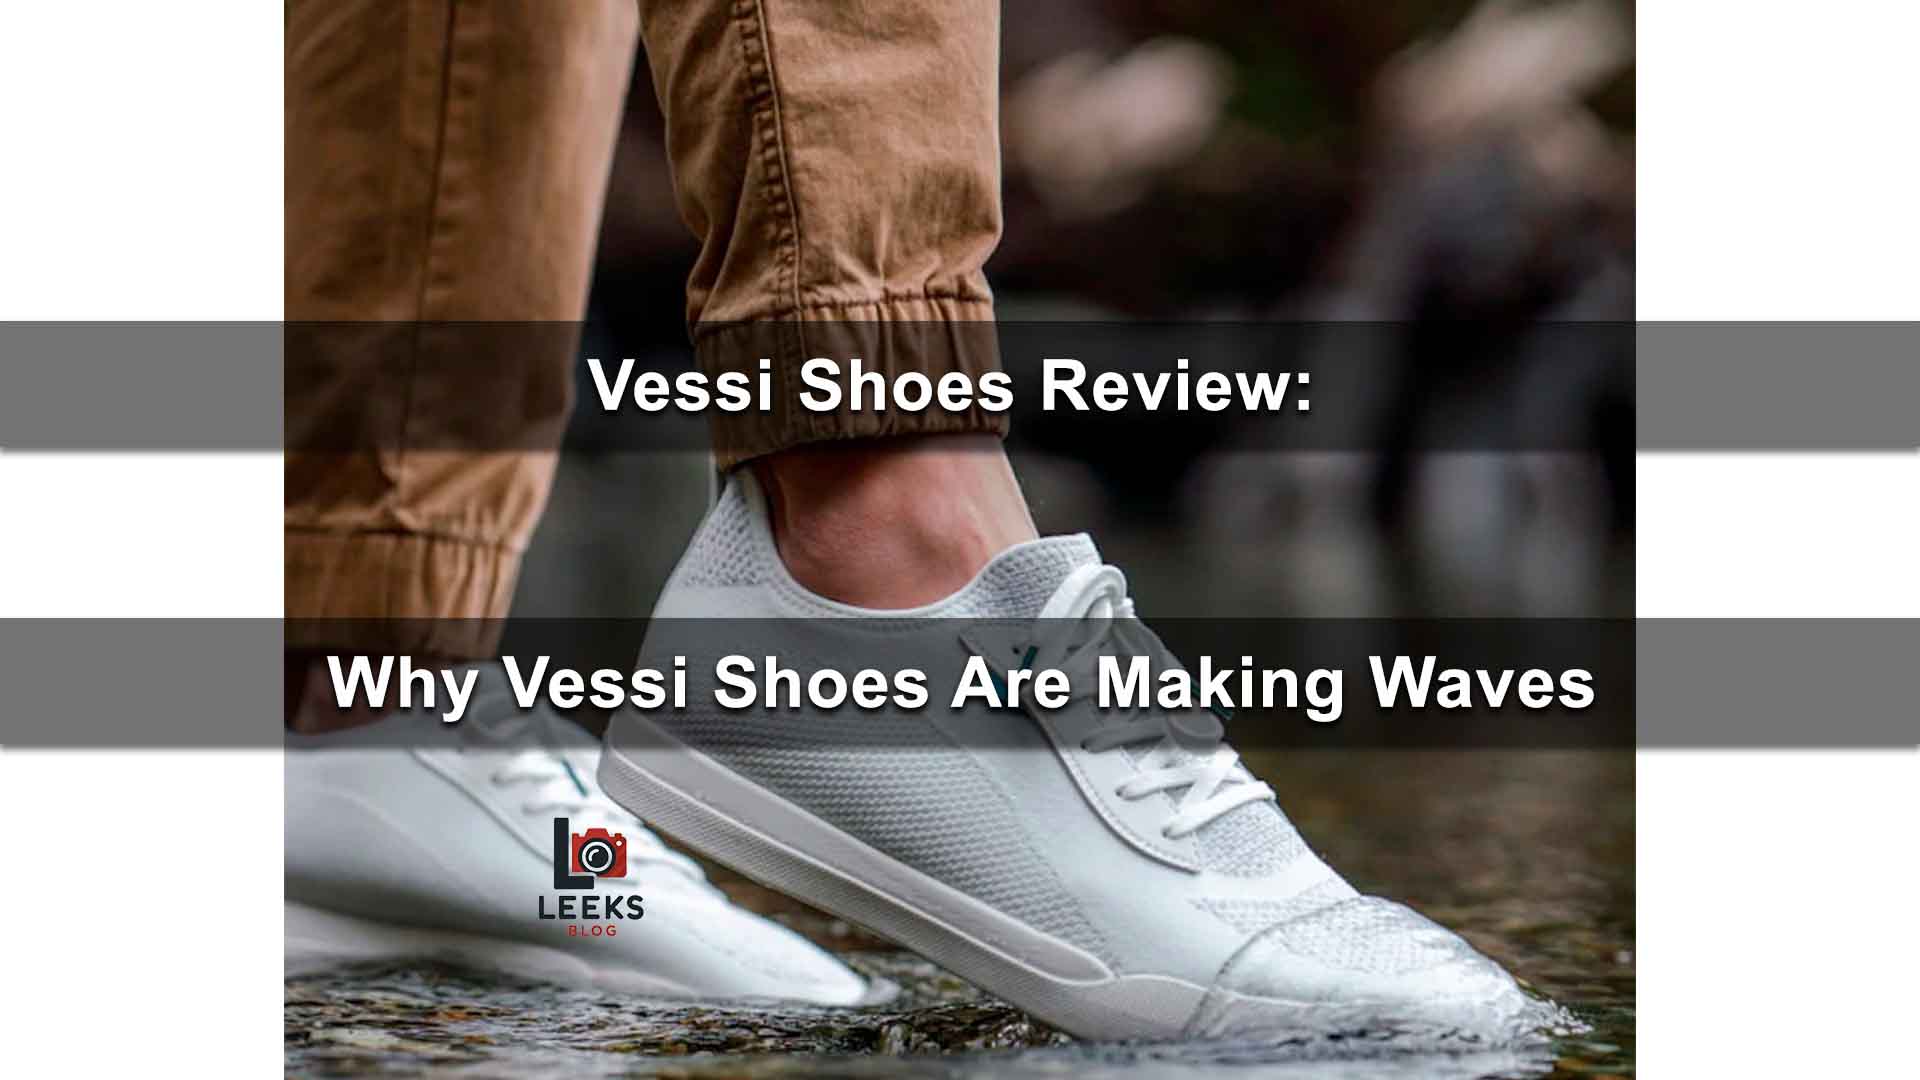 Vessi Shoes Review: Why Vessi Shoes Are Making Waves